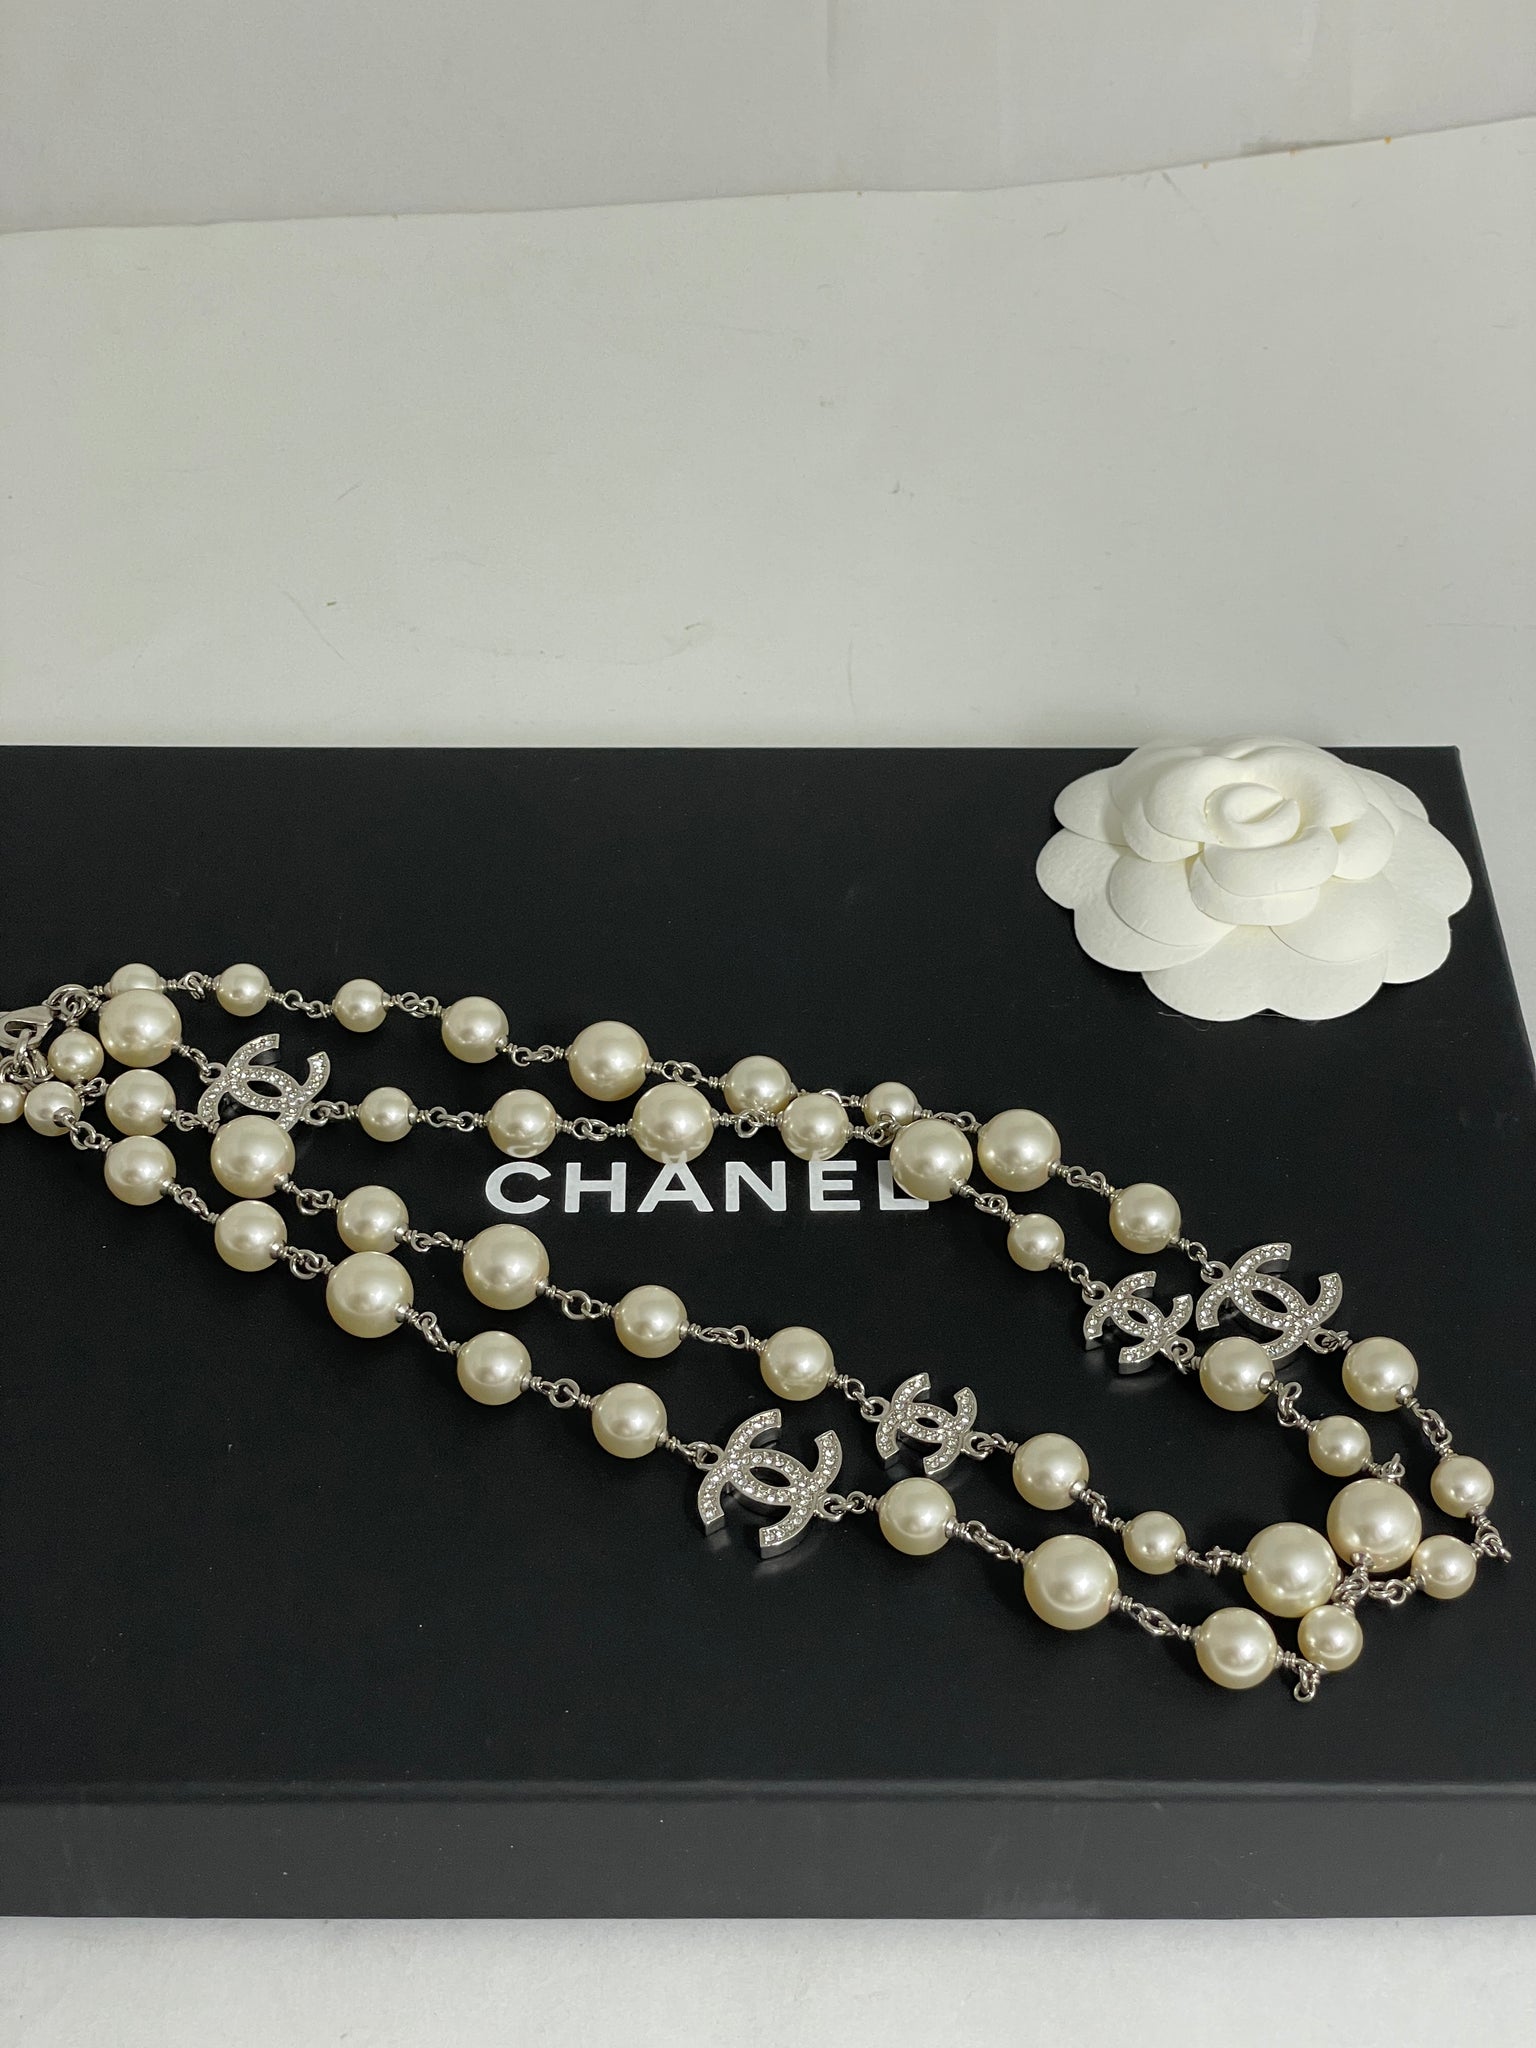 CHANEL Interlocking CC Pearl Necklace Crystal Spiral - Chelsea